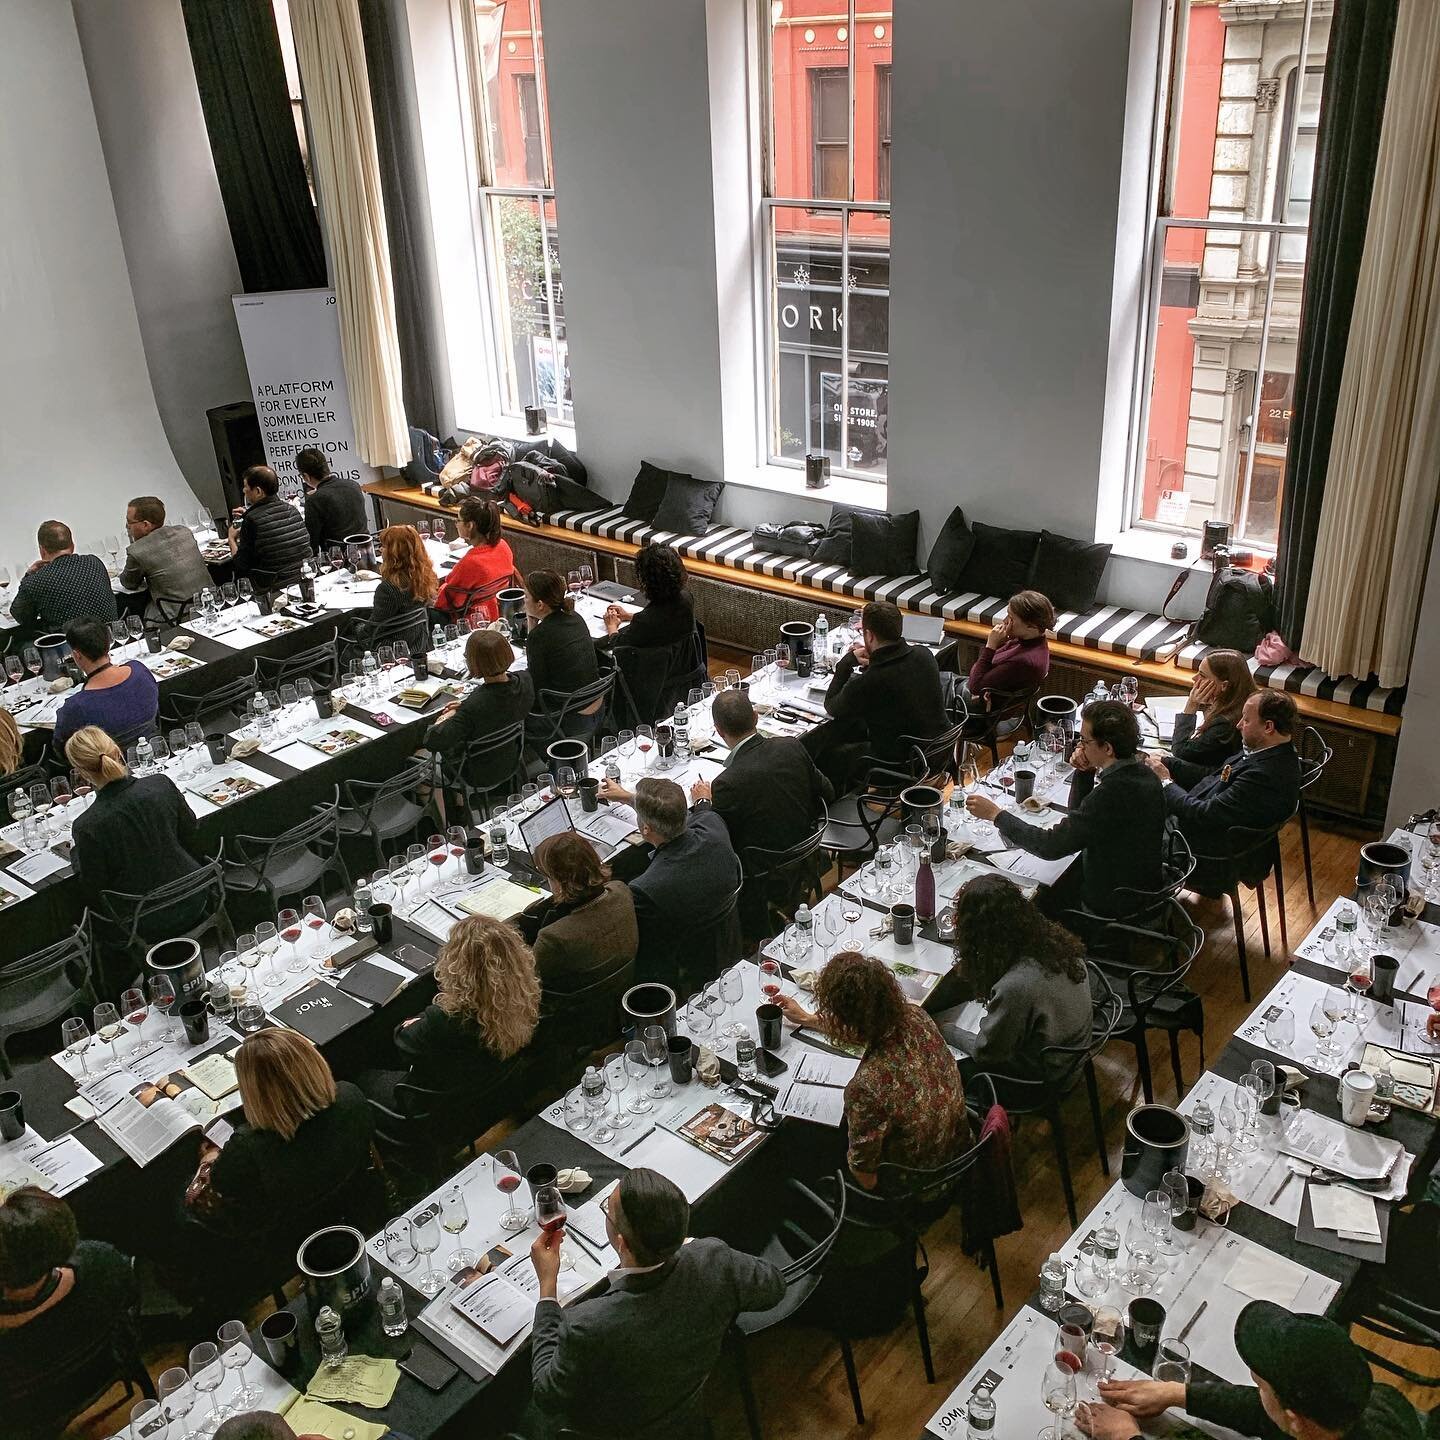 .
#sommelier bootcamp #wines @capsulestudio.nyc 
50 seated classroom style 🍷🍷🍾🍷🍷🍷🍷🍷🍾🍷🍷
.
.
.
.
.
.

#event #meetingplanner #eventspace #venue #nyeventspace #corporate #meeting #conference #pr #branding #communication #presentation #meeting